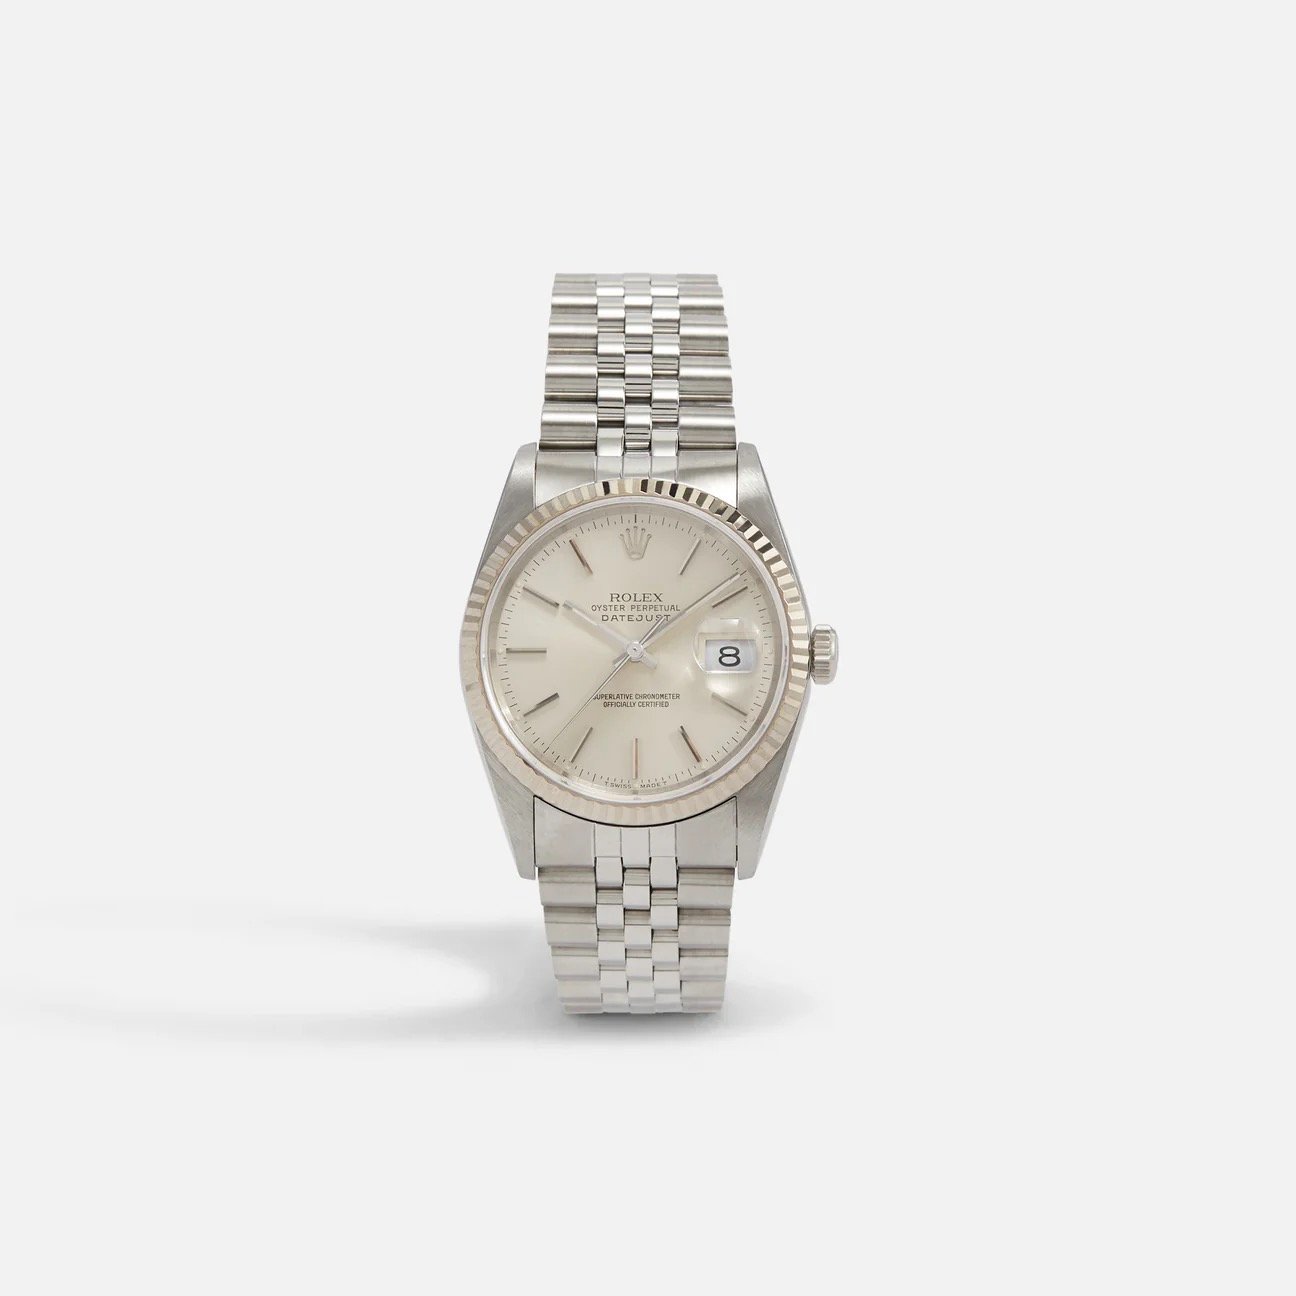 Rolex Silver Dial Datejust Reference 16234 Unpolished